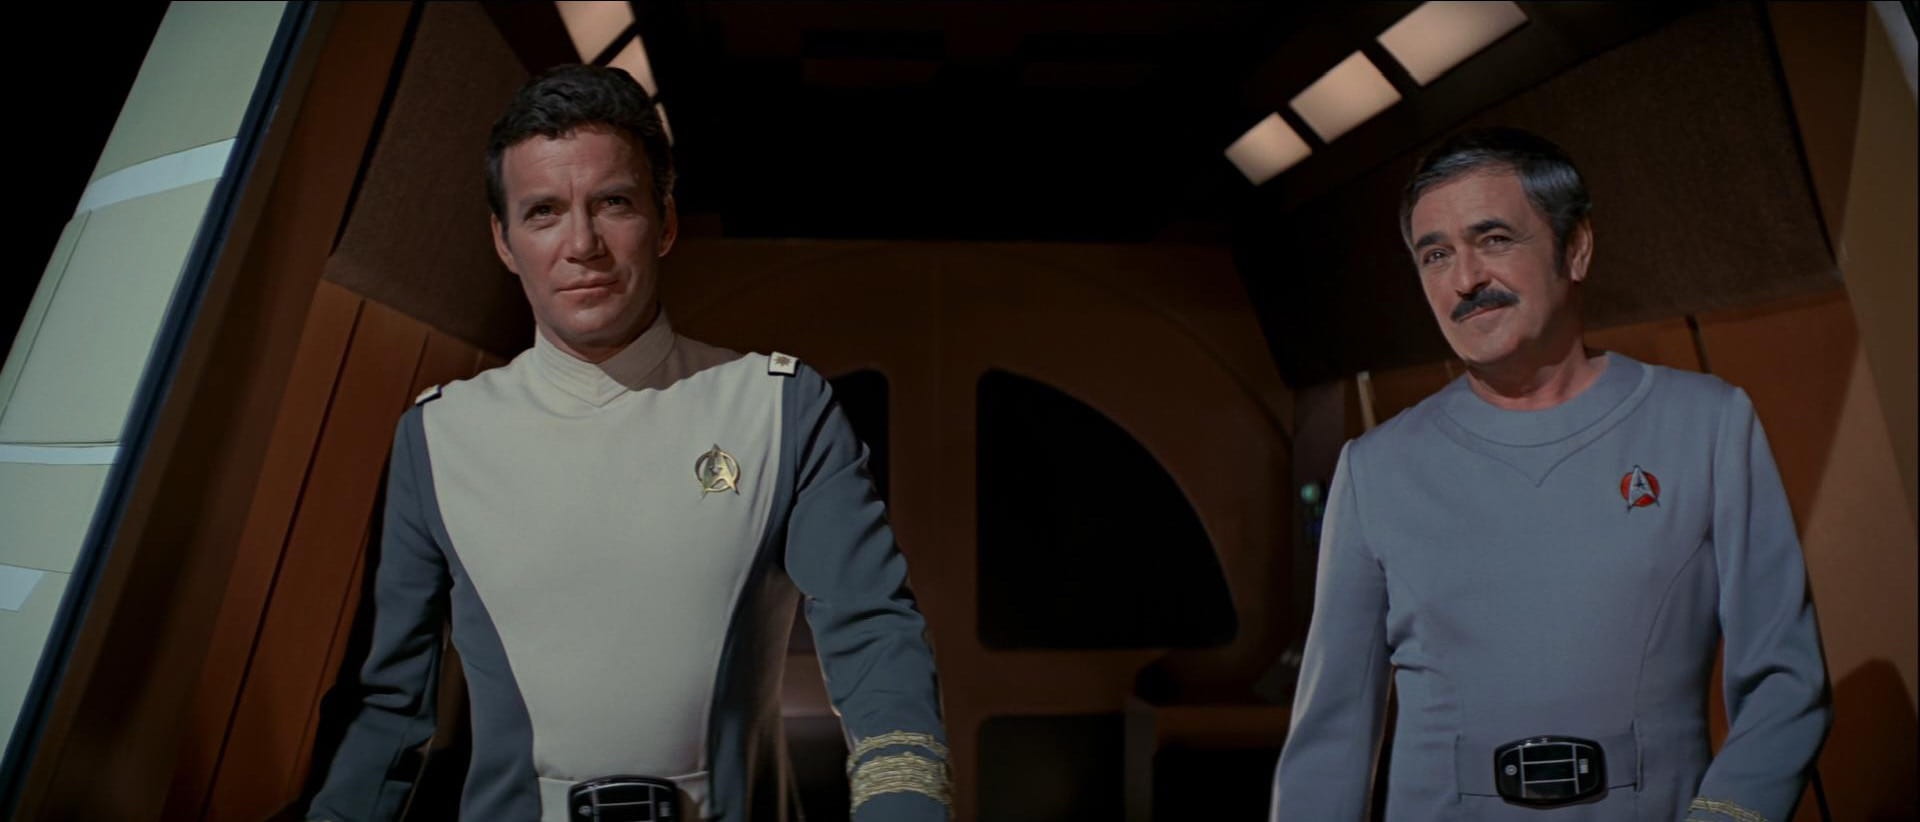 Kirk and Scotty in Star Trek: The Motion Picture